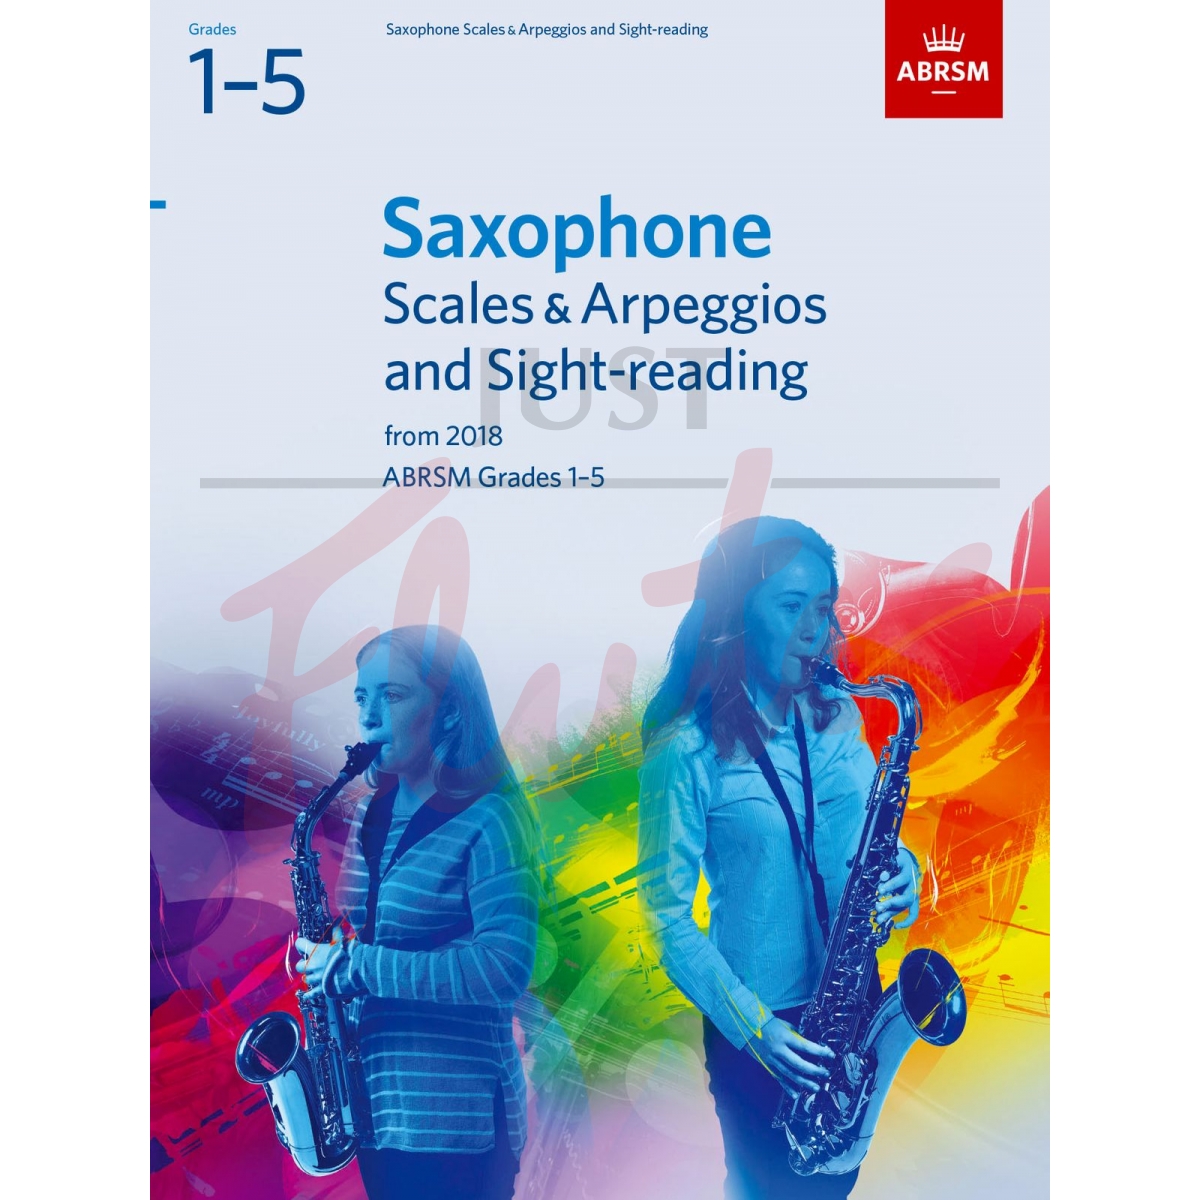 Scales &amp; Arpeggios and Sight-Reading Pack Grades 1-5 (from 2018) [Saxophone]